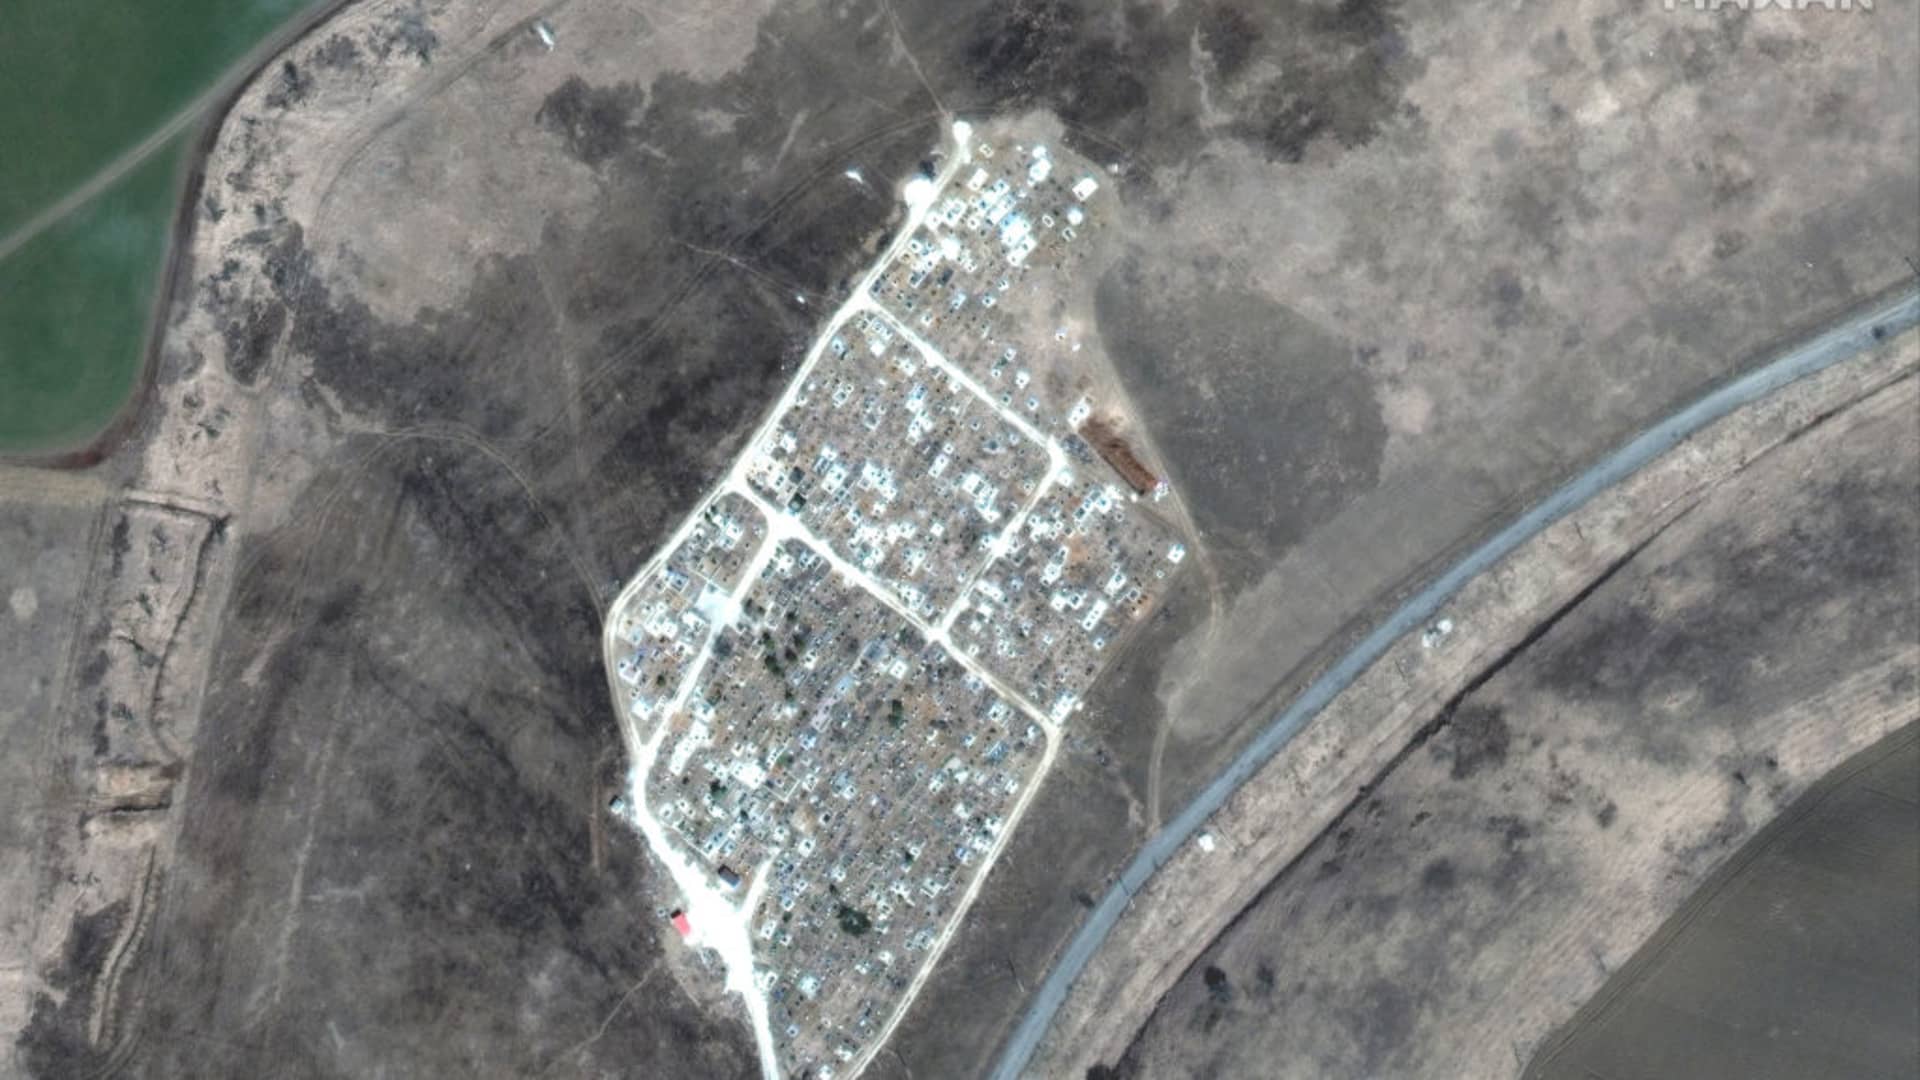 Maxar satellite imagery of another mass grave site expansion just outside of Vynohradne, Ukraine, just east of Mariupol.